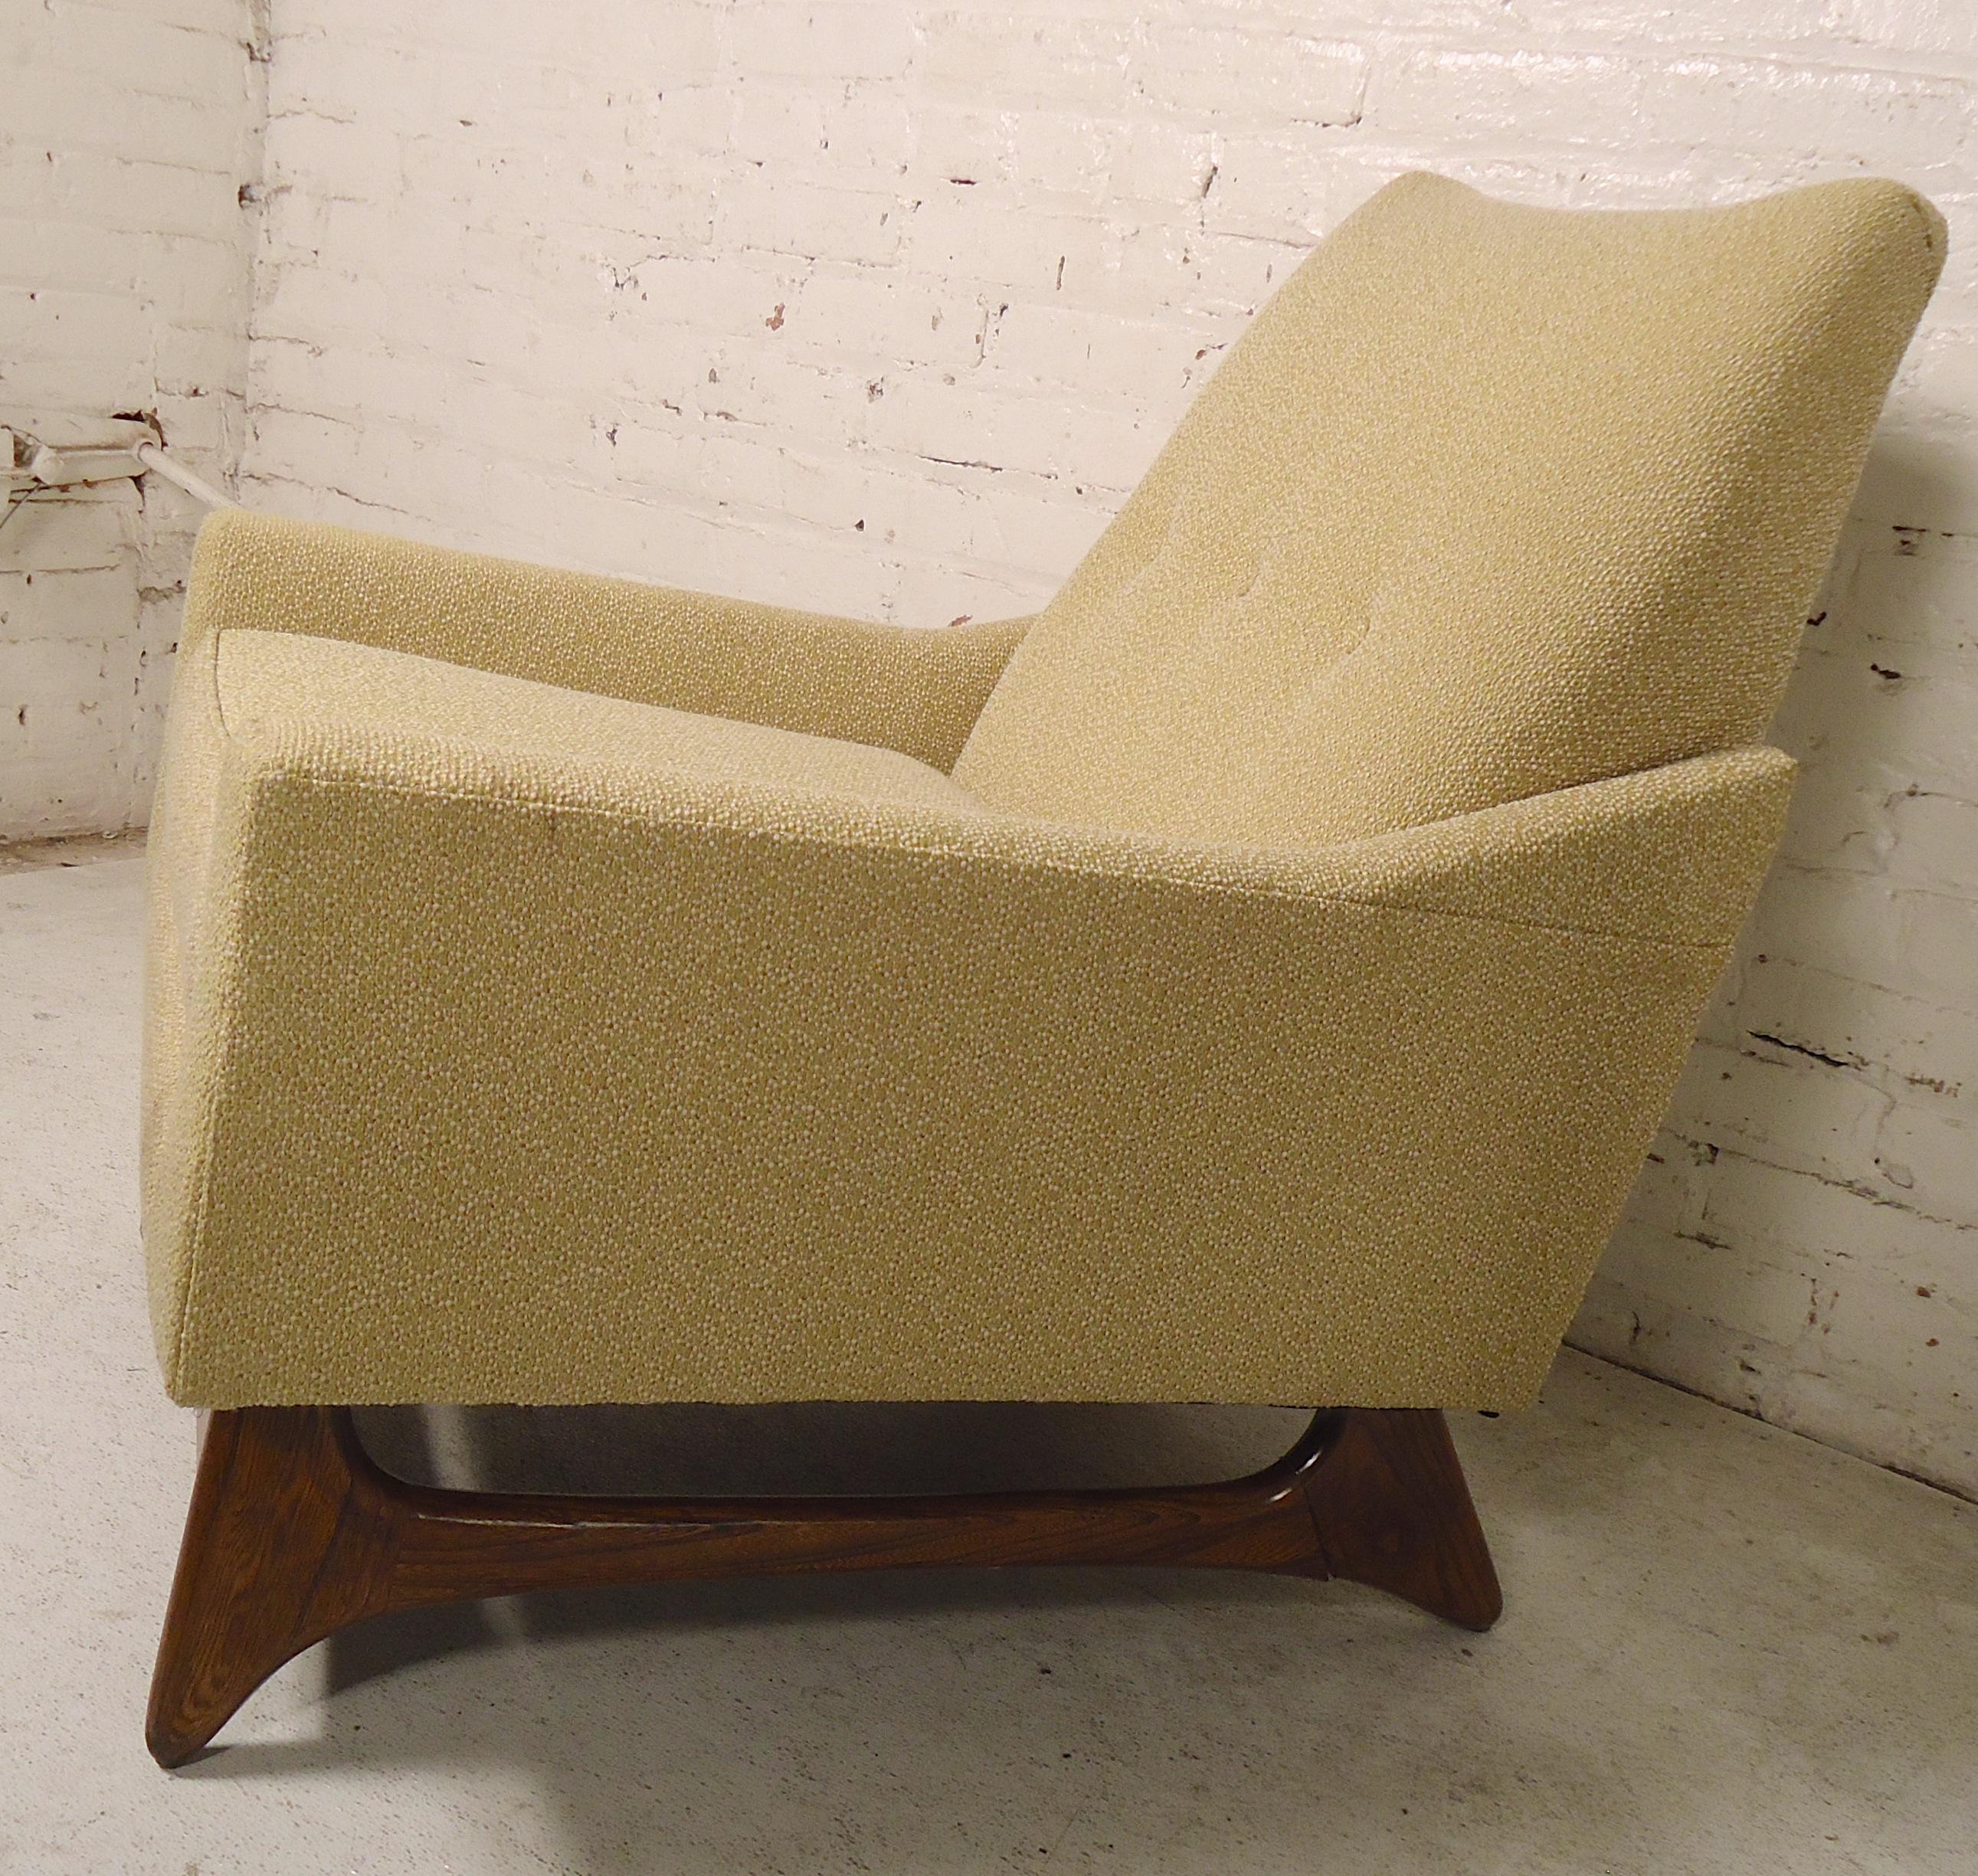 Sleek Mid-Century Modern lounge chair with sculpted Pearsall style wood base. Clean fabric, comfortable cushioning and clean modern lines.

(Please confirm item location - NY or NJ - with dealer).
 